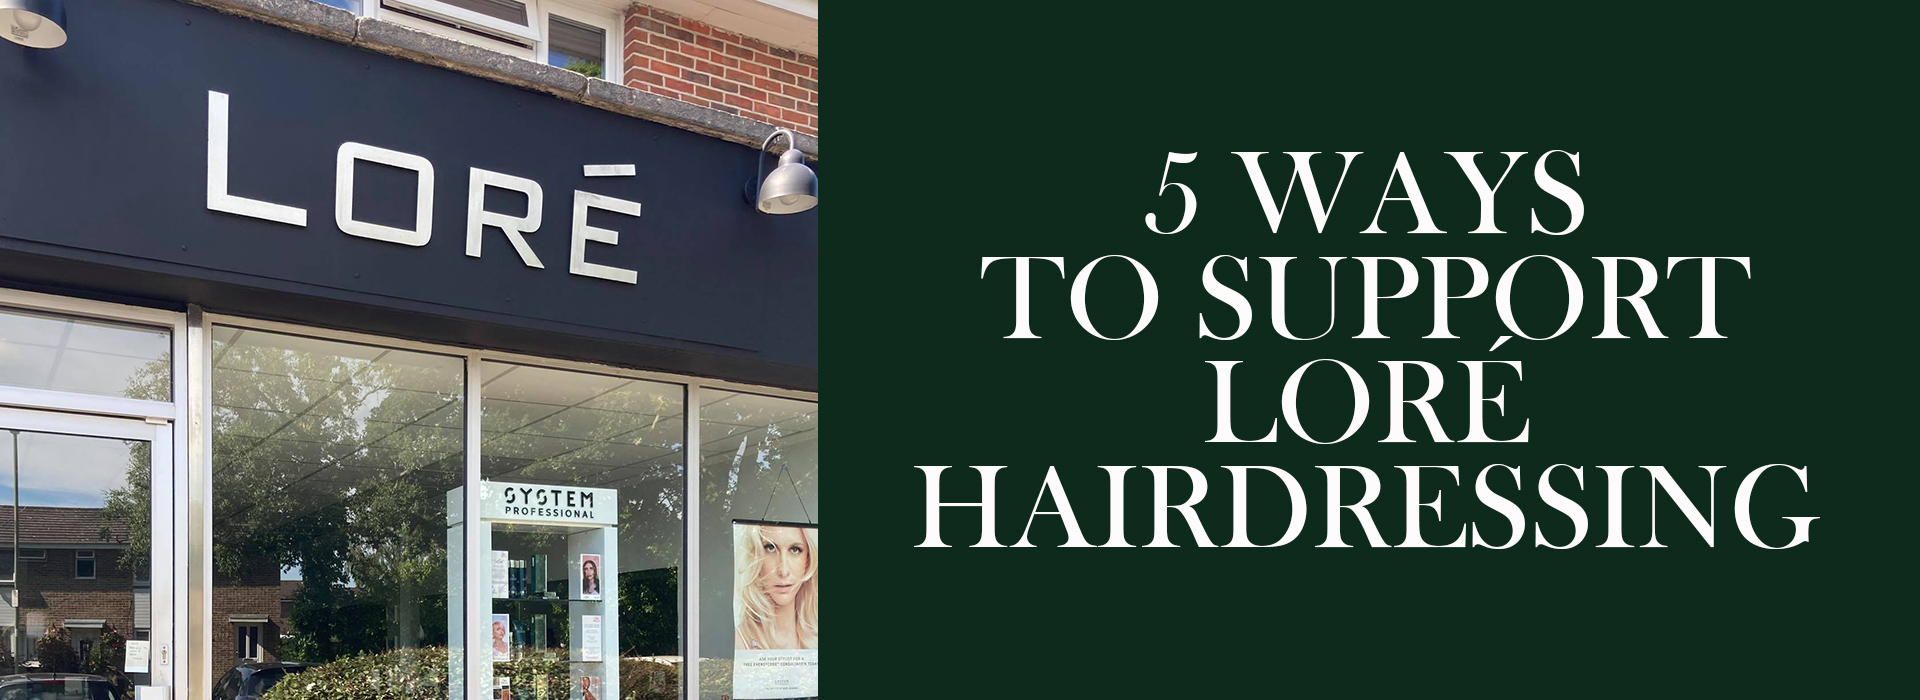 5 Ways To Support Loré Hairdressing Lore Hairdressing Salon in North Baddlesley